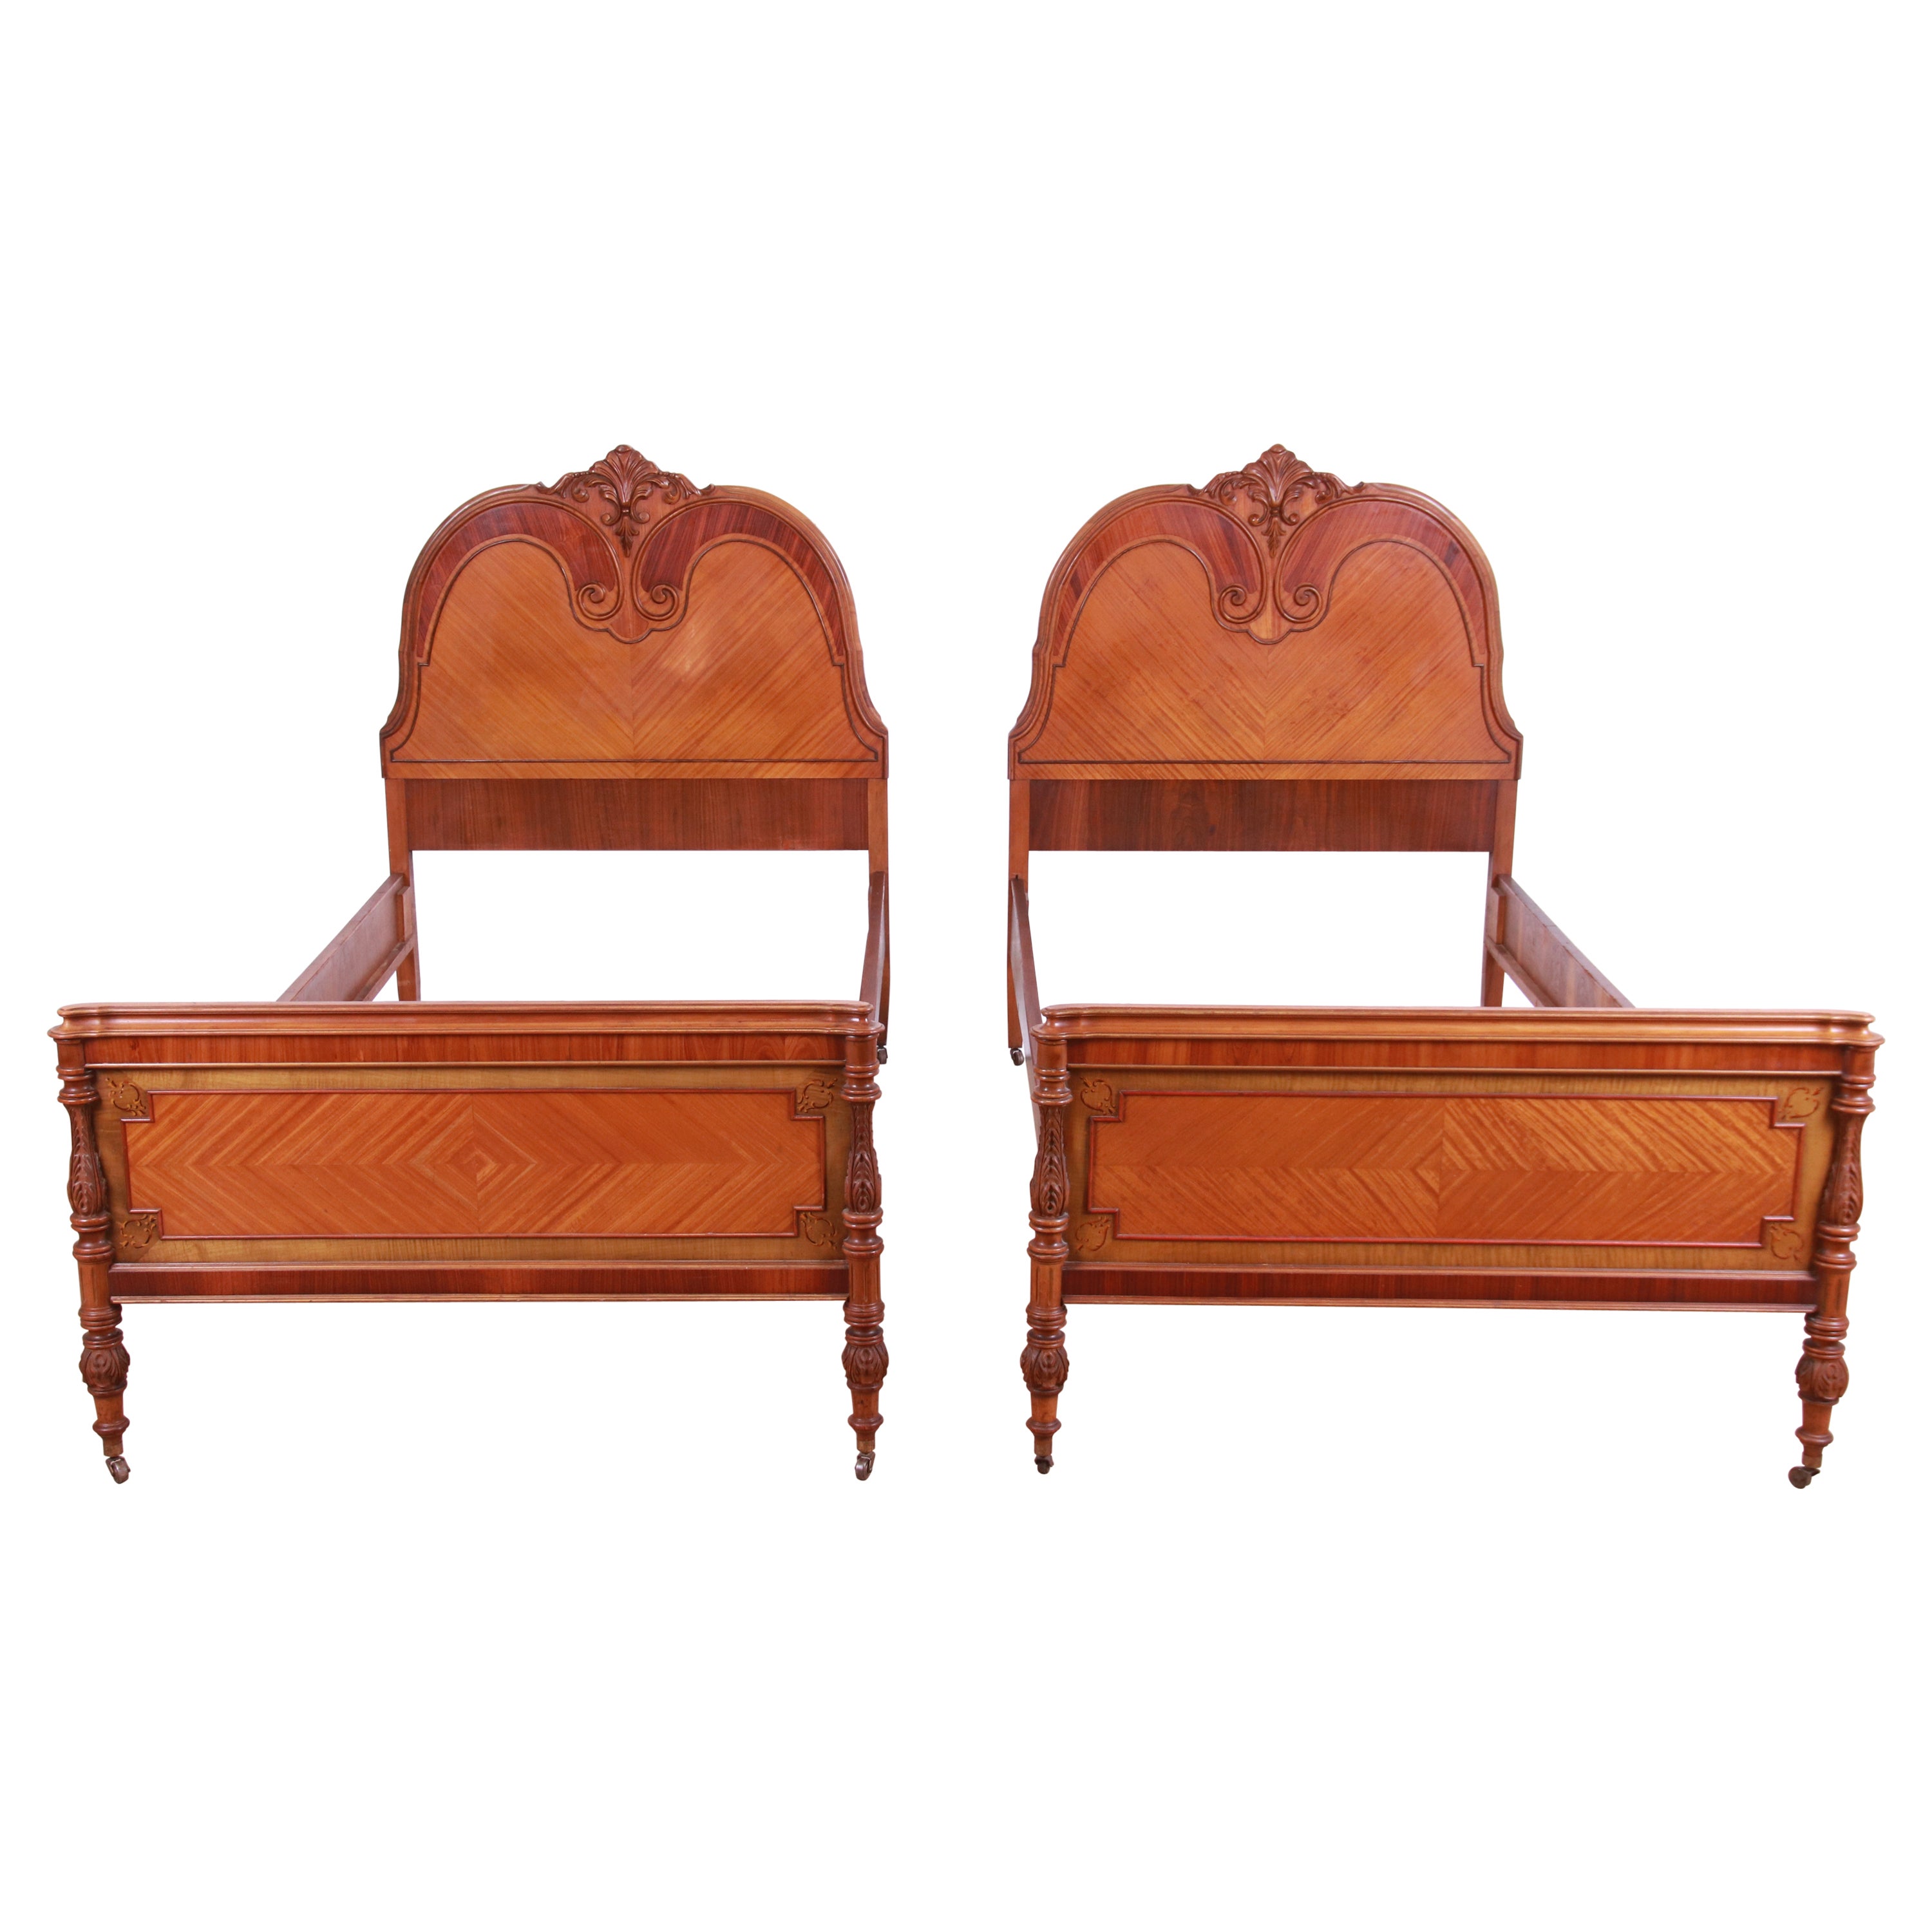 French Art Deco Satinwood and Carved Walnut Twin Beds, Circa 1920s